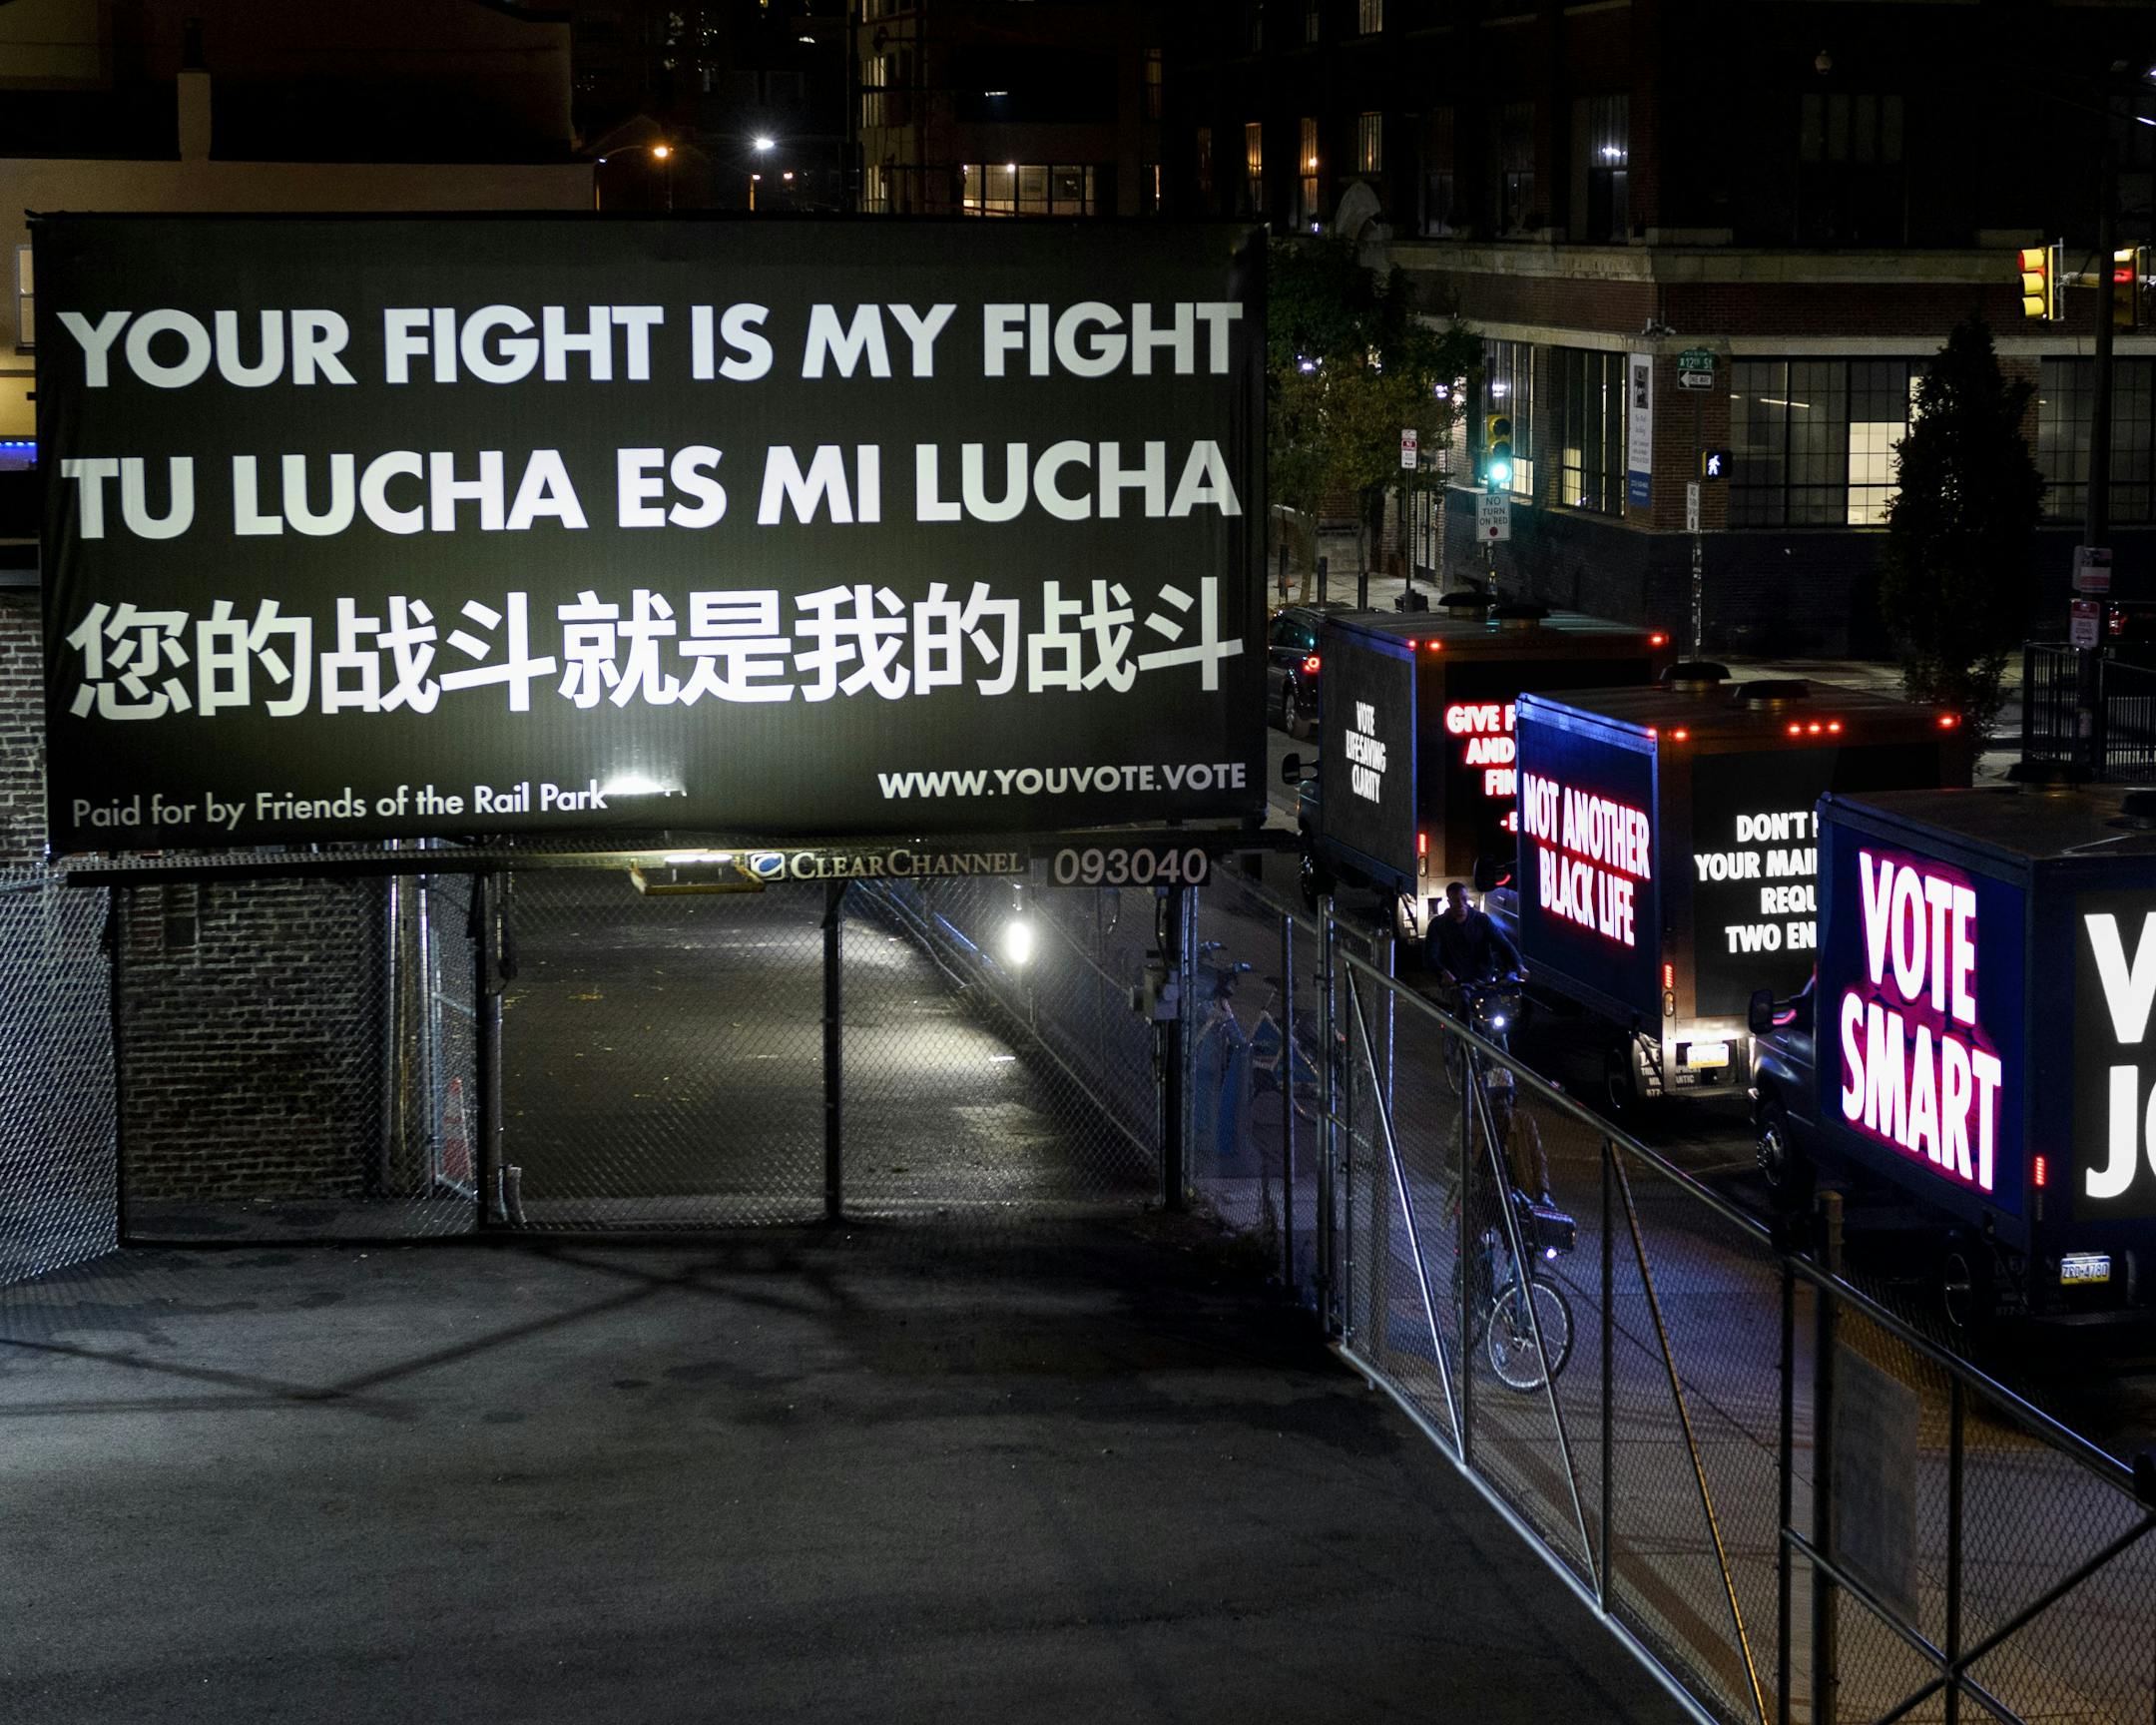 At nighttime, lights illuminate a black and white billboard that reads "YOUR FIGHT IS MY FIGHT" in English, Spanish, and Mandarin. 3 Trucks with LED screens reading "VOTE JOBS", "VOTE SMART" drive by the street below. 